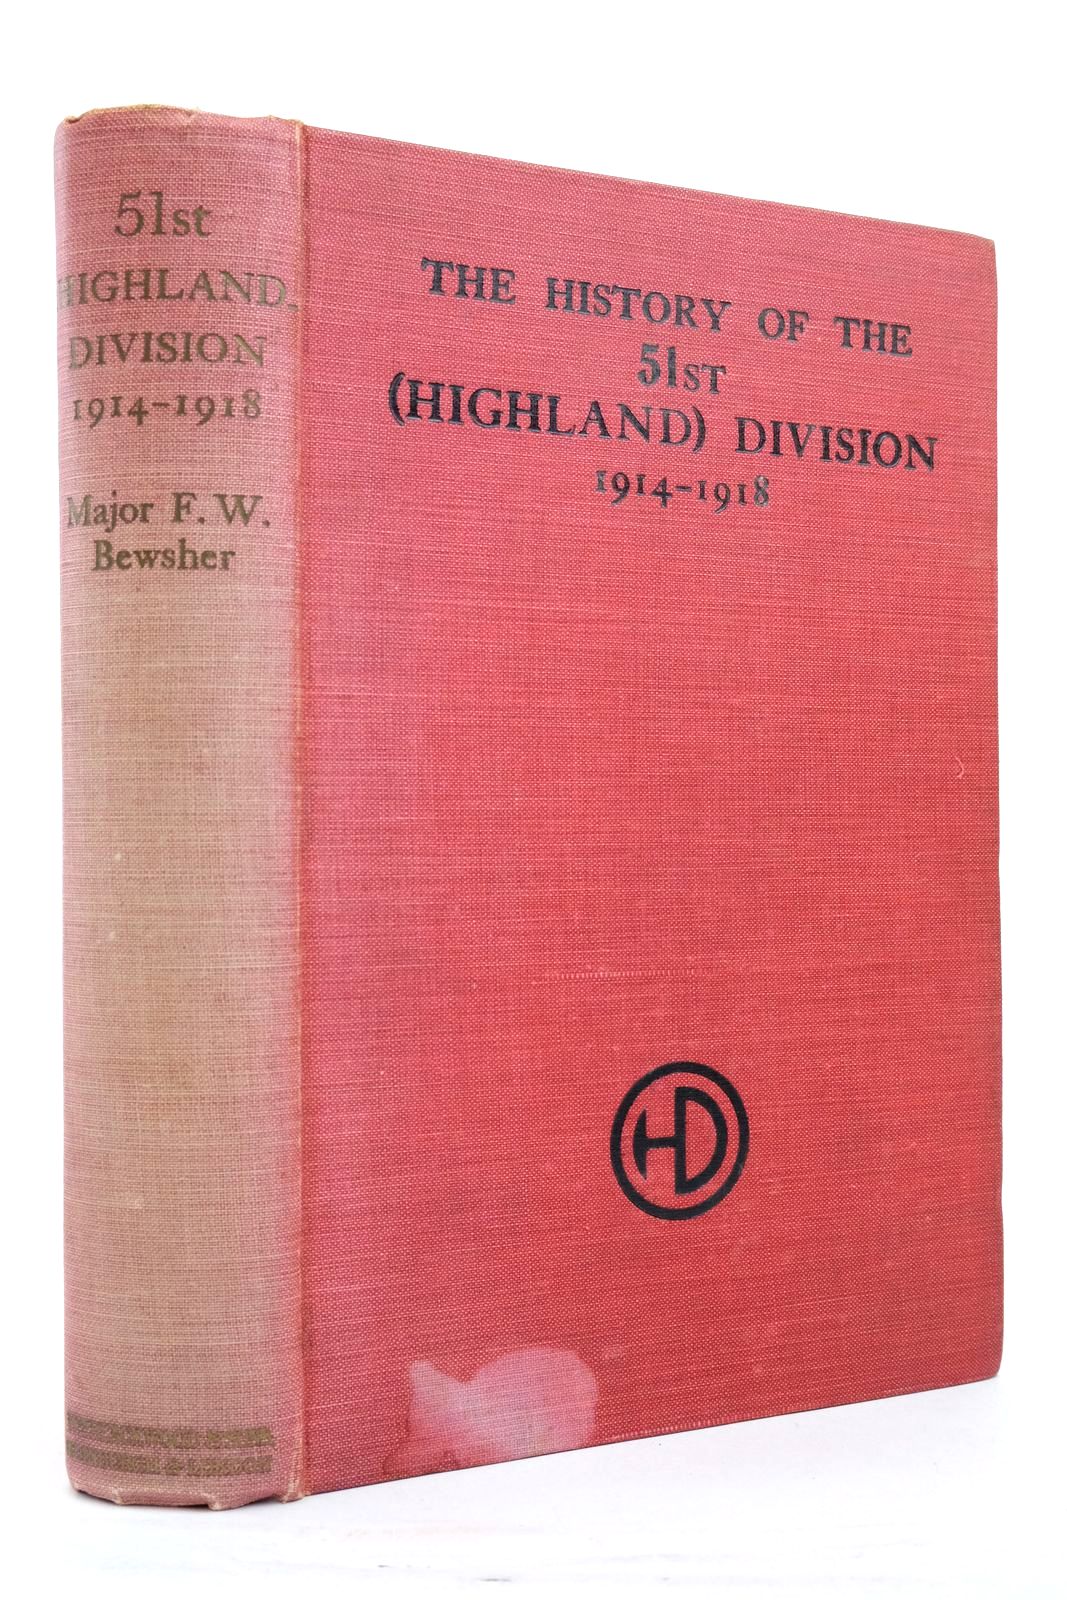 Photo of THE HISTORY OF THE 51ST (HIGHLAND) DIVISION 1914-1918- Stock Number: 2137571